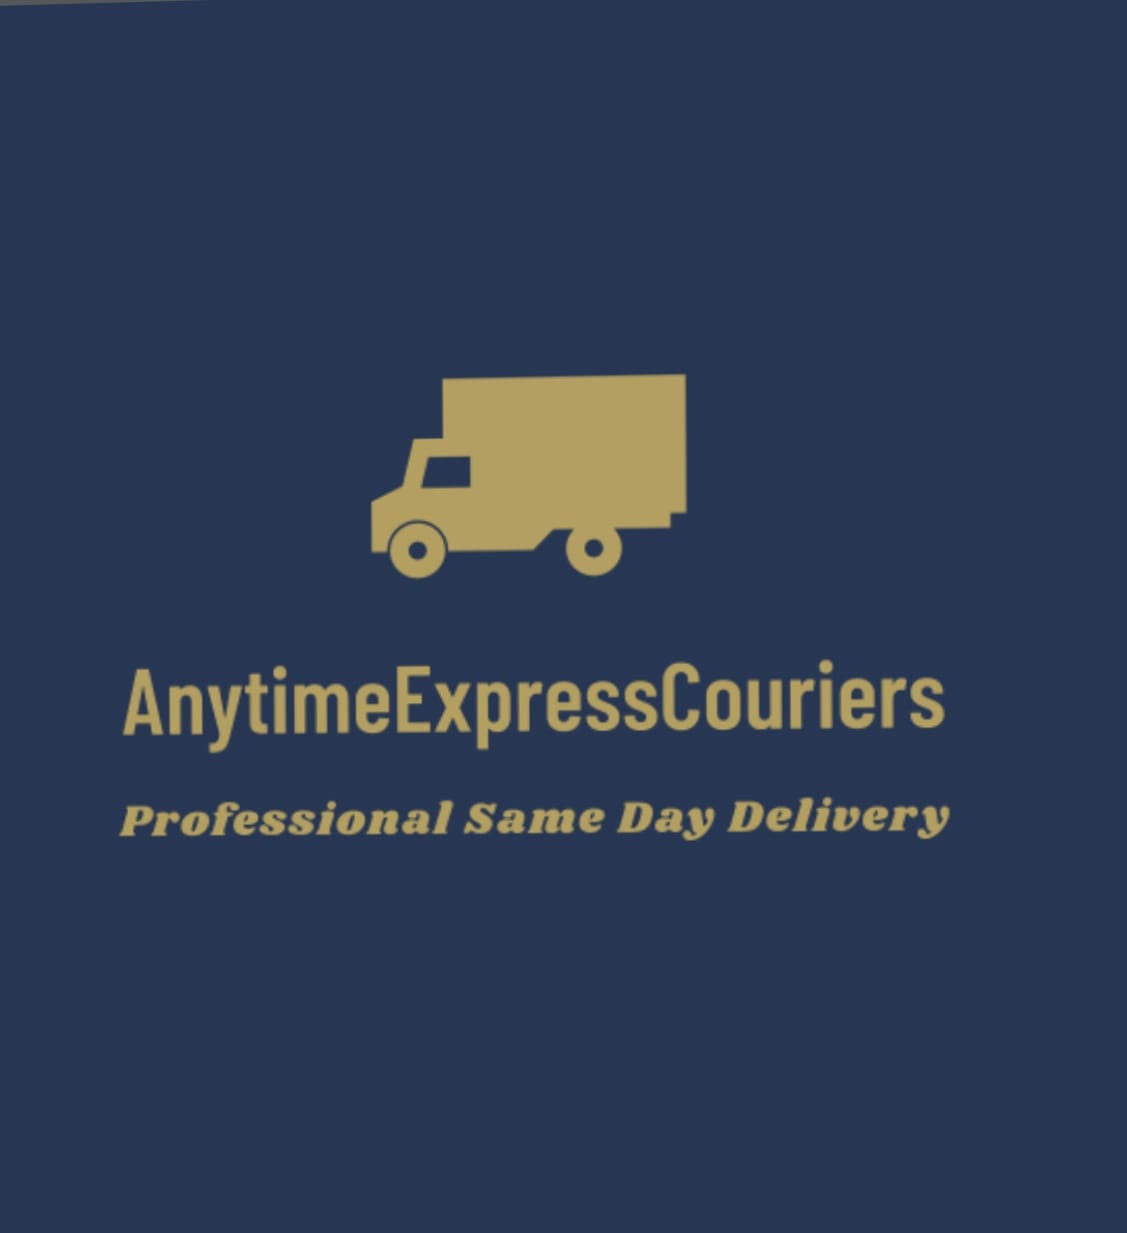 Anytime Express Couriers